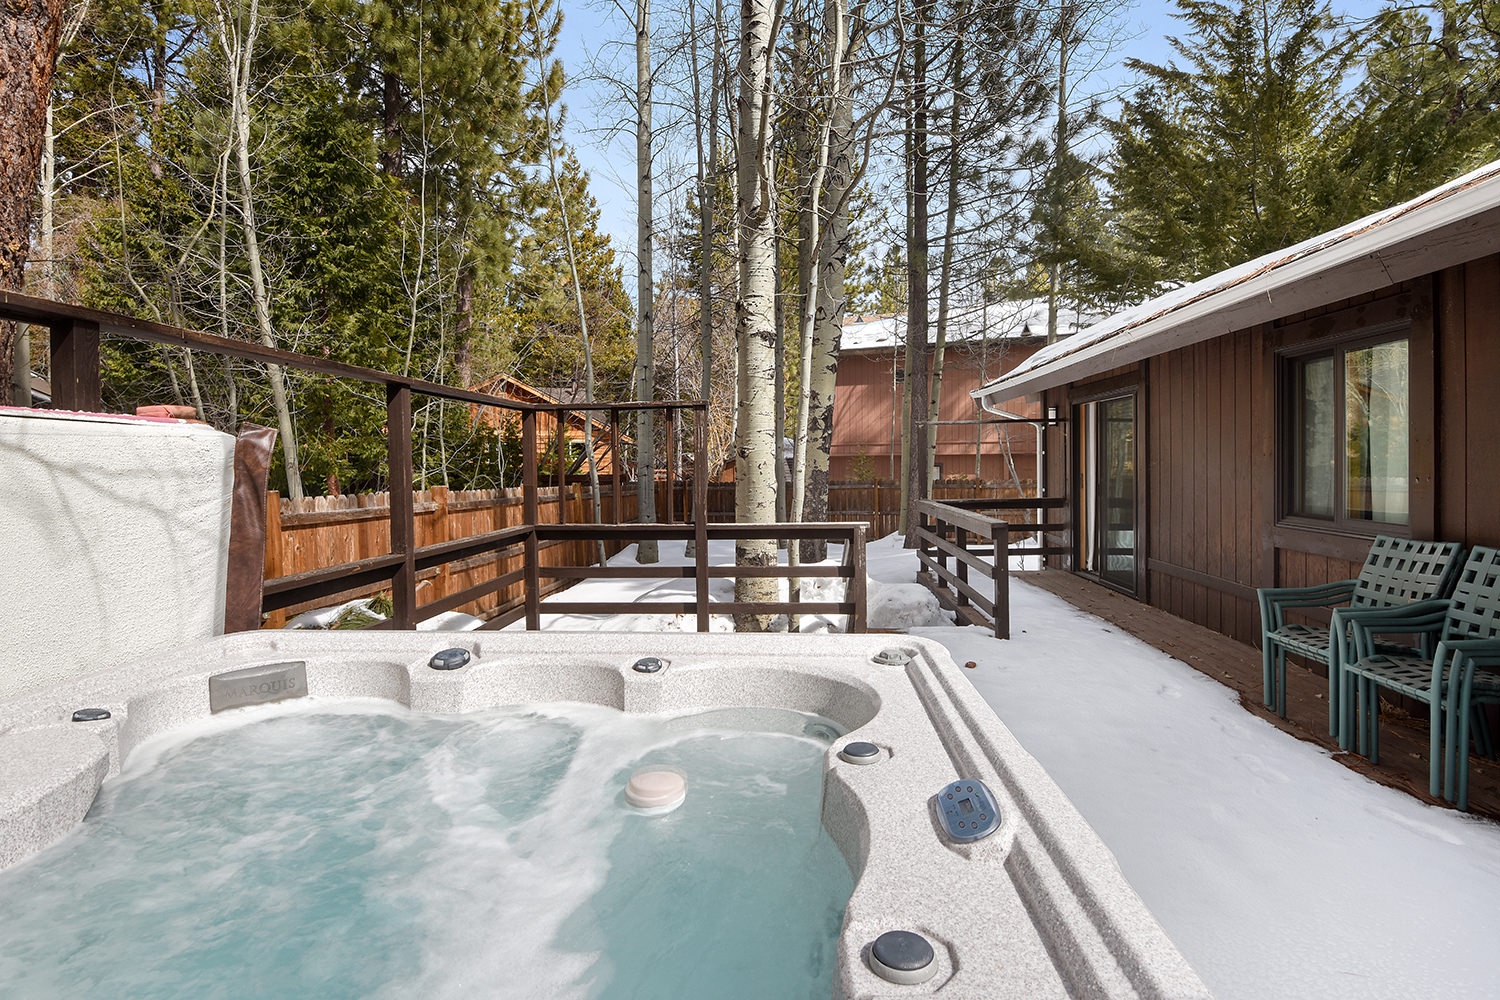 Large deck with private hot tub